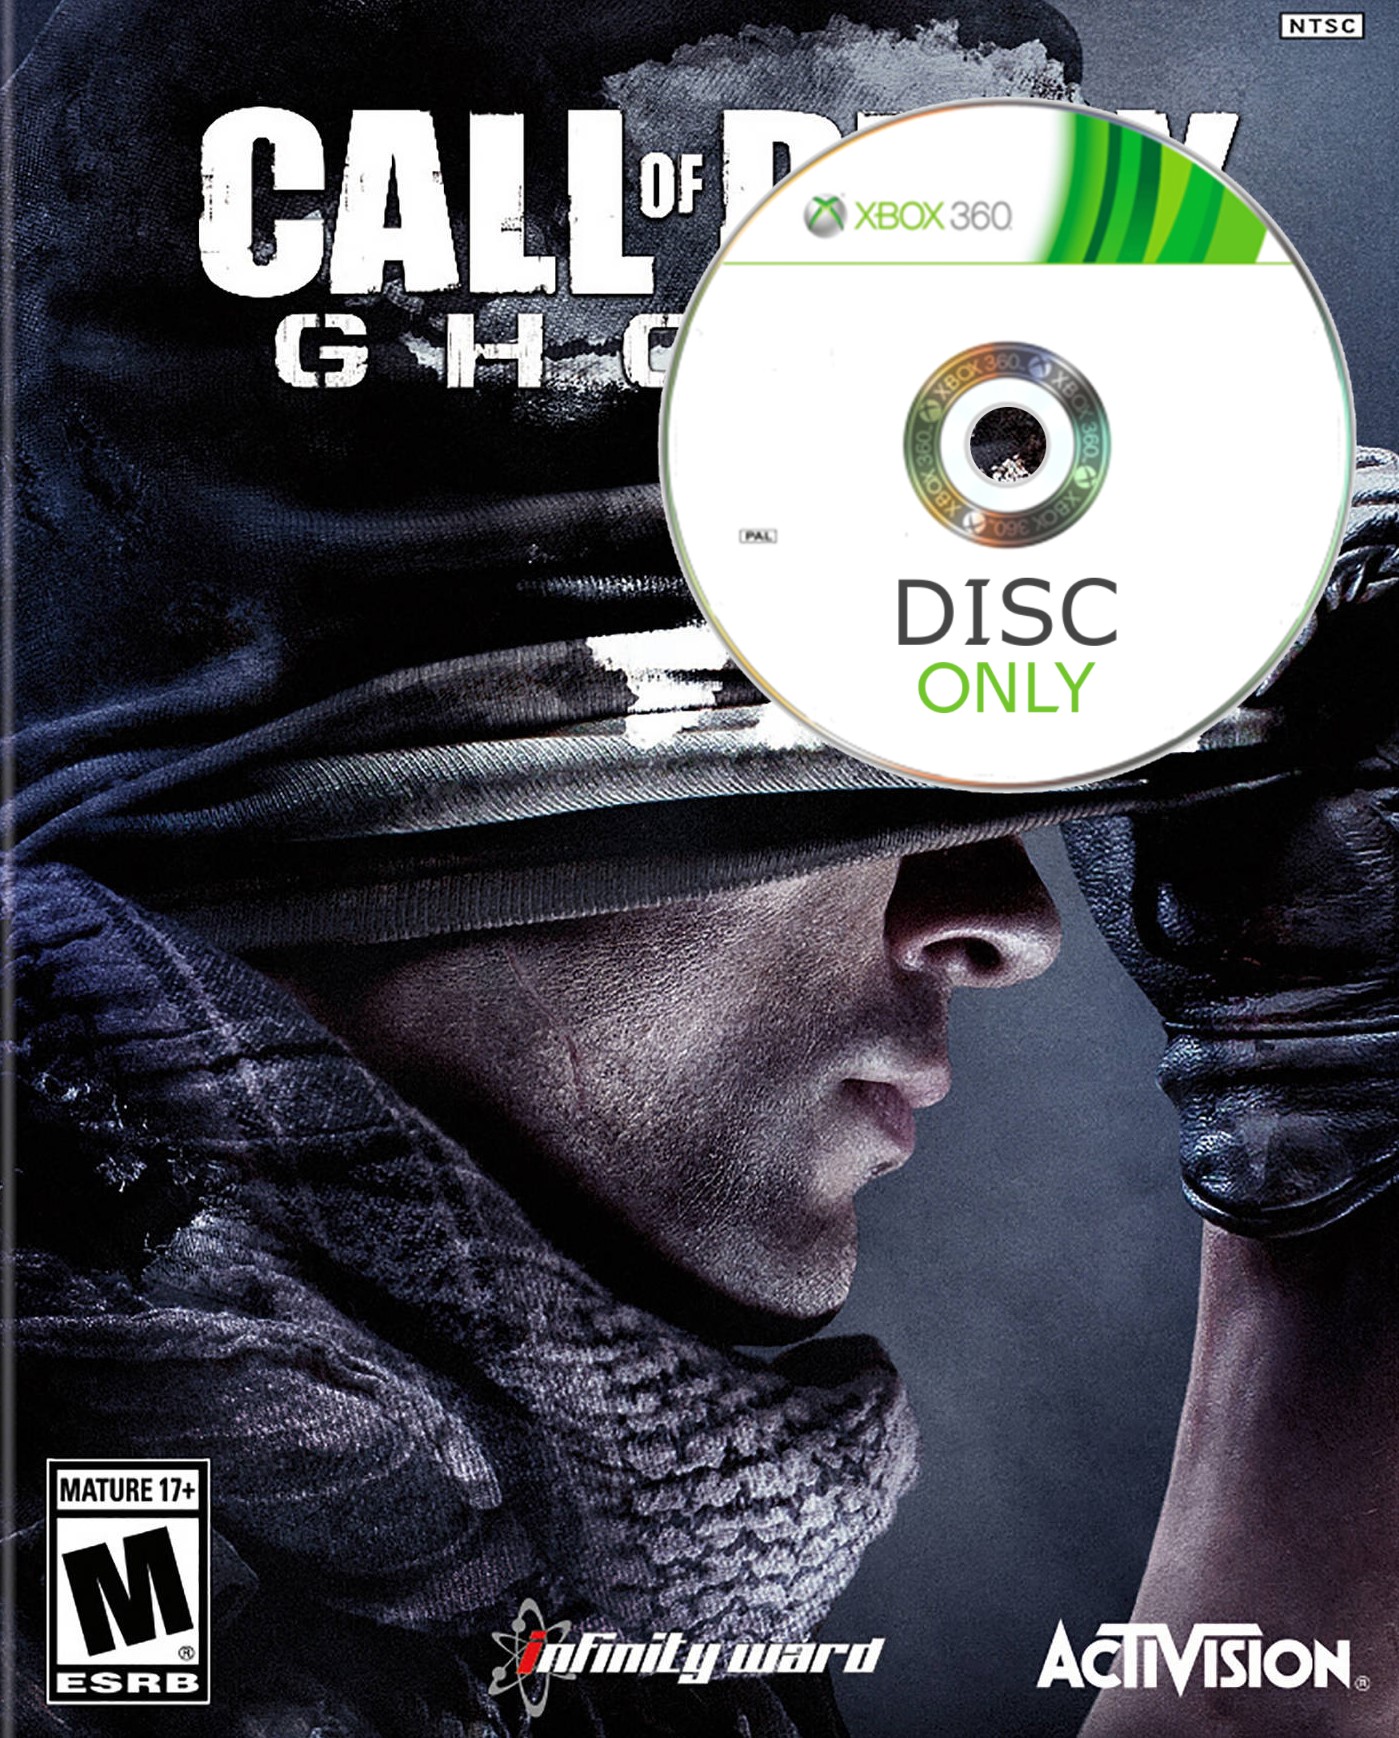 Call of Duty: Ghosts - Disc Only - Xbox 360 Games